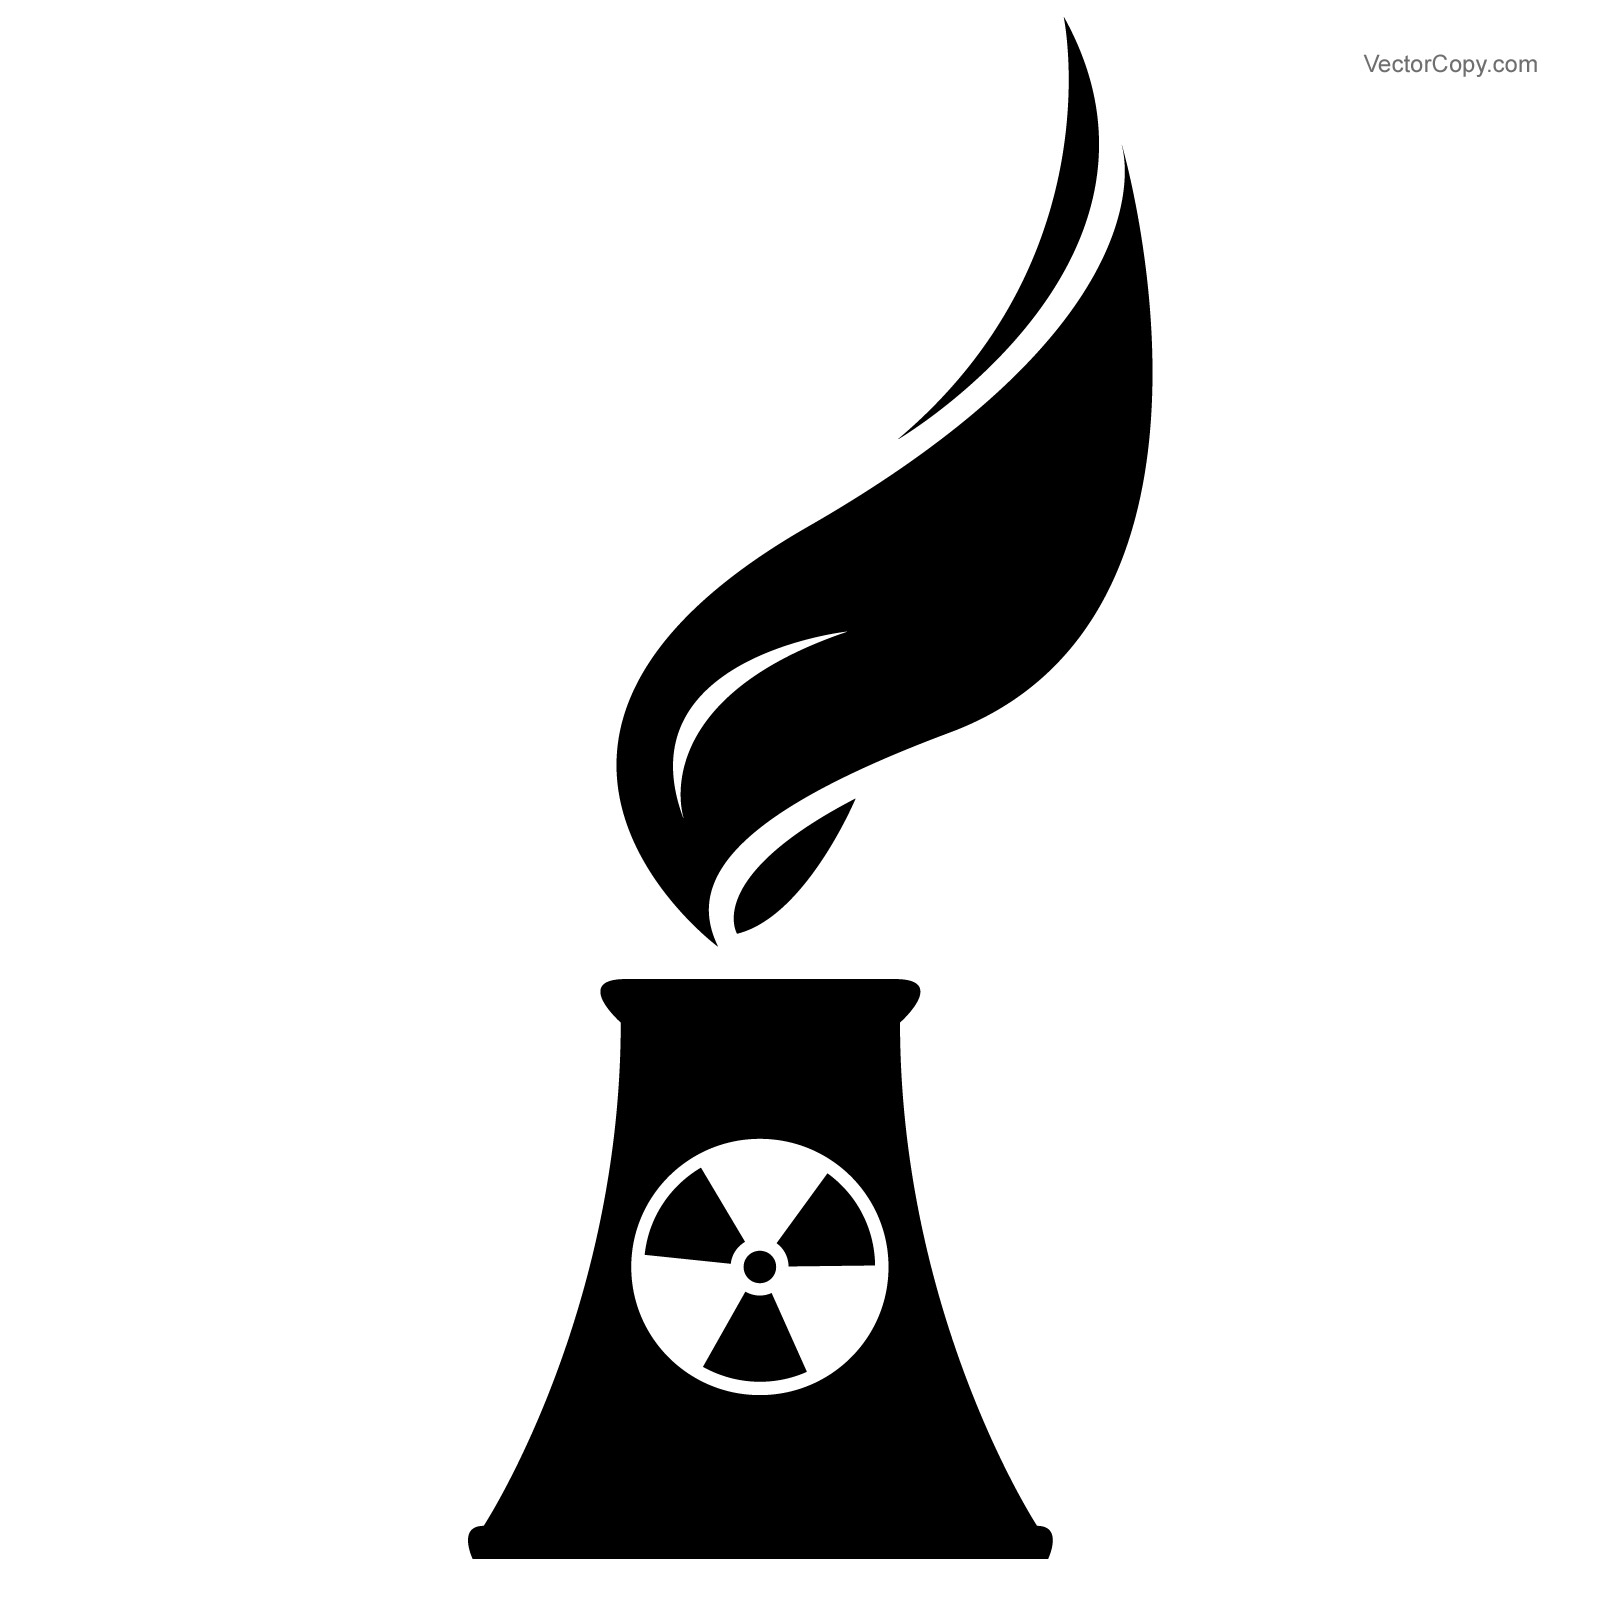 Nuclear Energy Logo   Reactor Icon Free Vector  Eps  By Vectorcopy